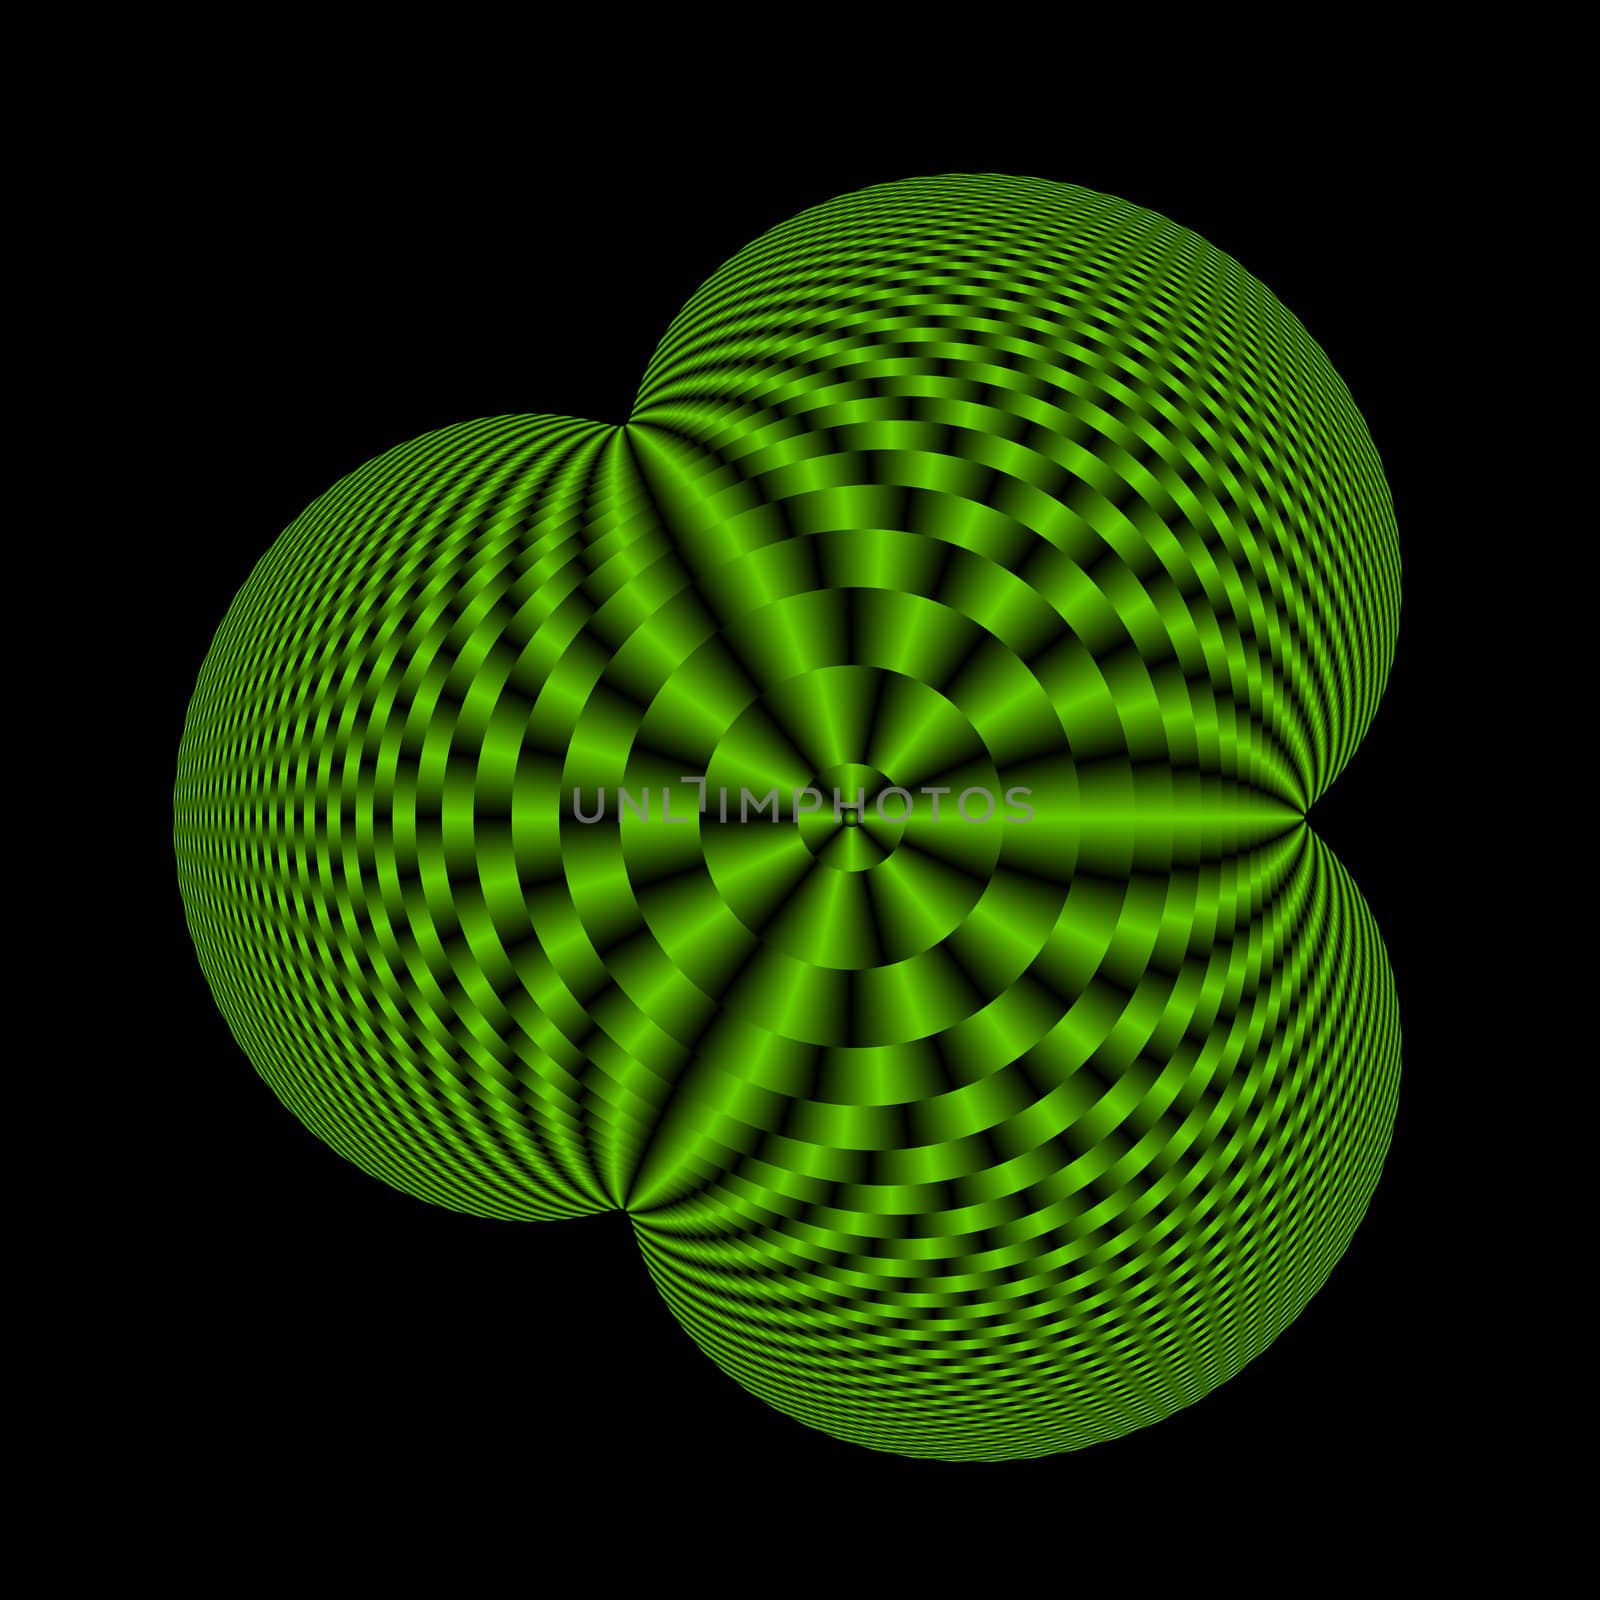 An abstract depiction representing clover.